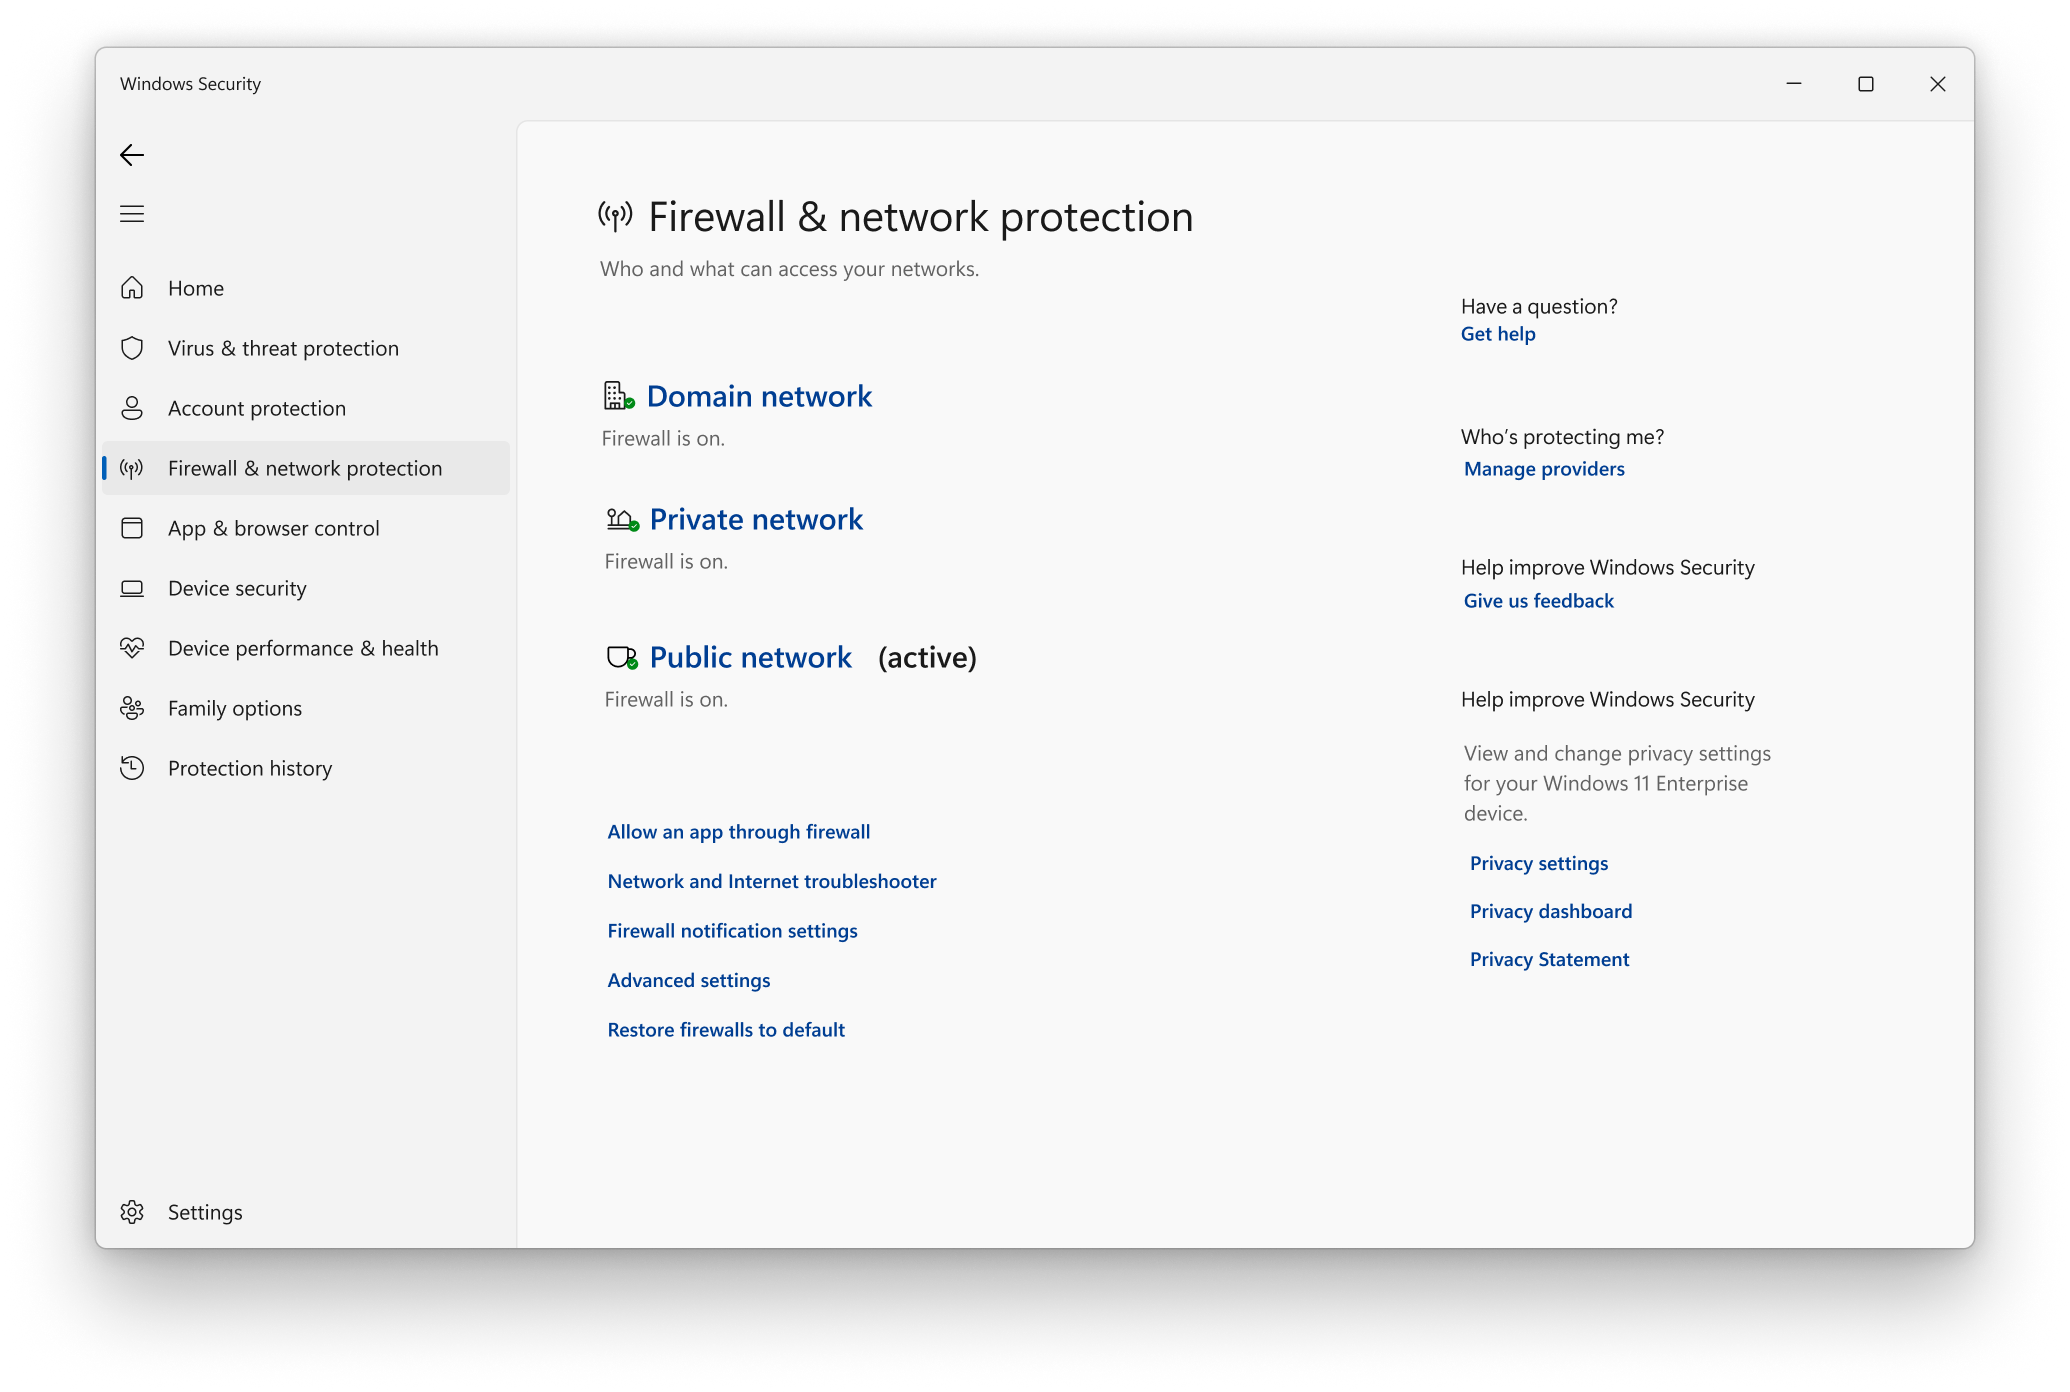 Windows Security and Firewall settings